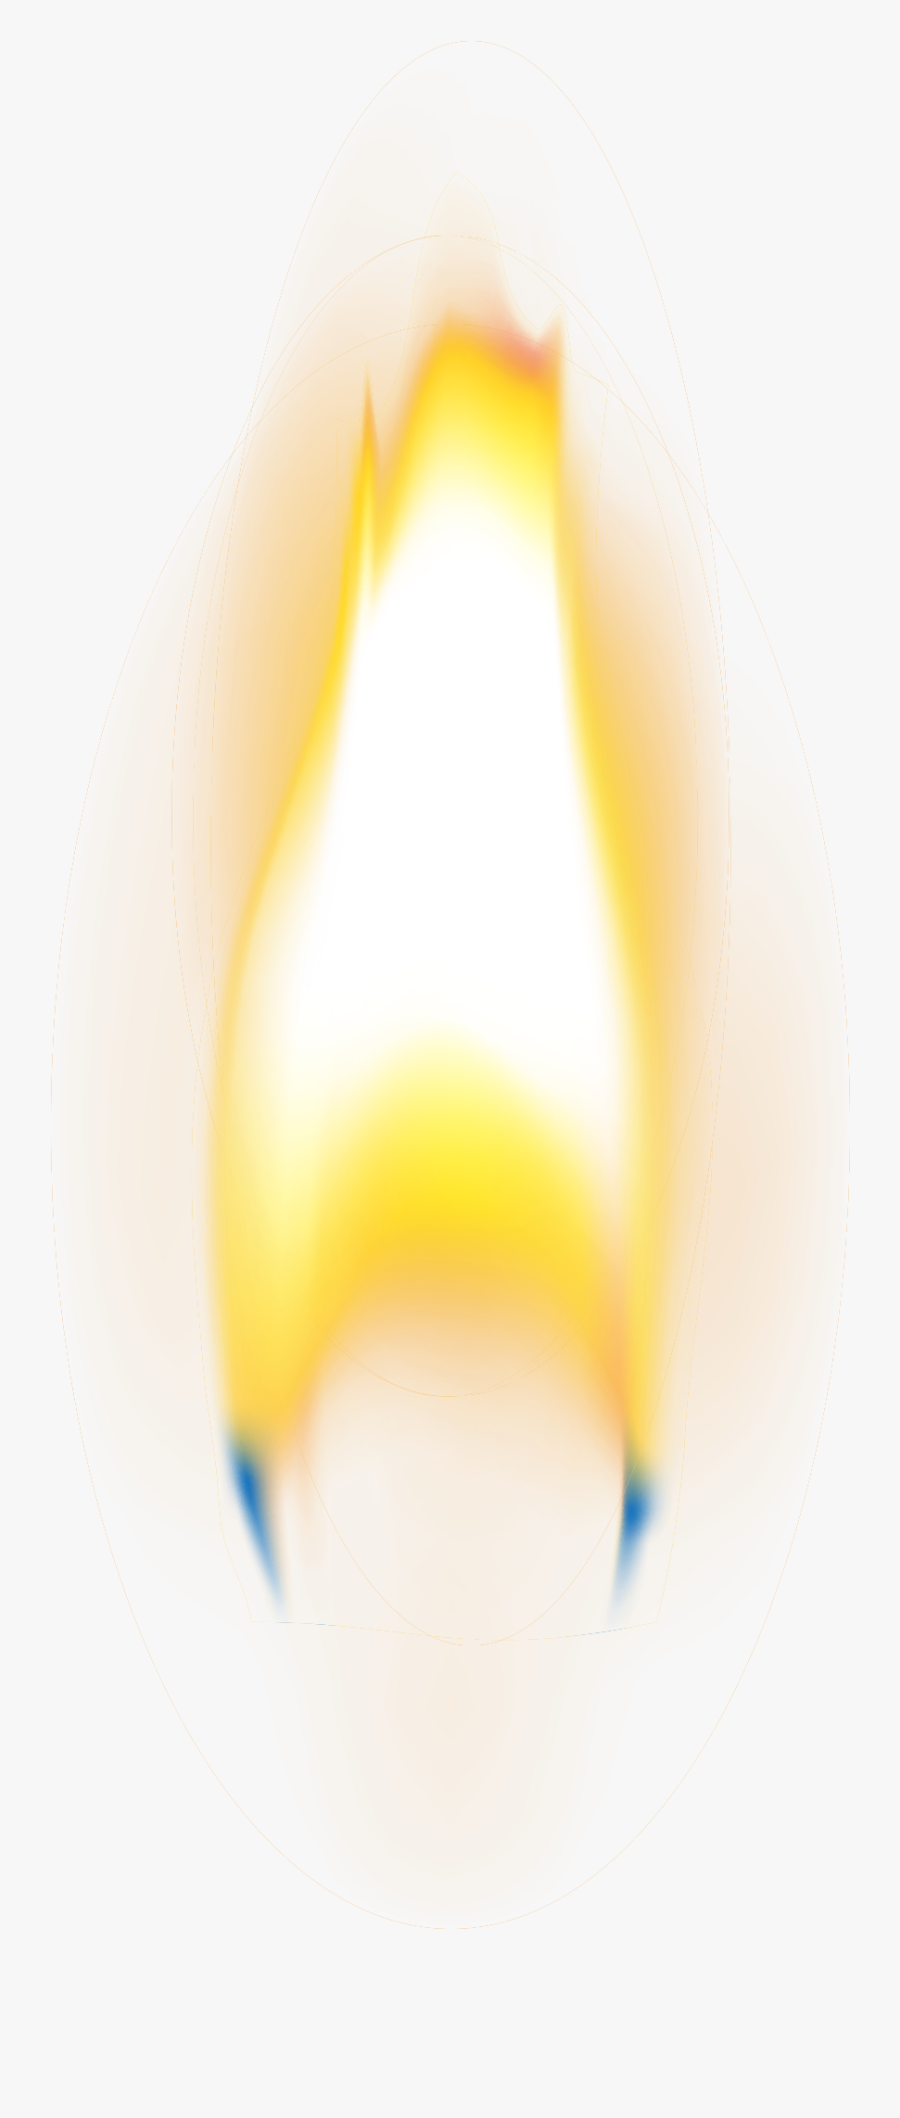 Candle Flame Png - Candle Flame Transparent Background, Transparent Clipart